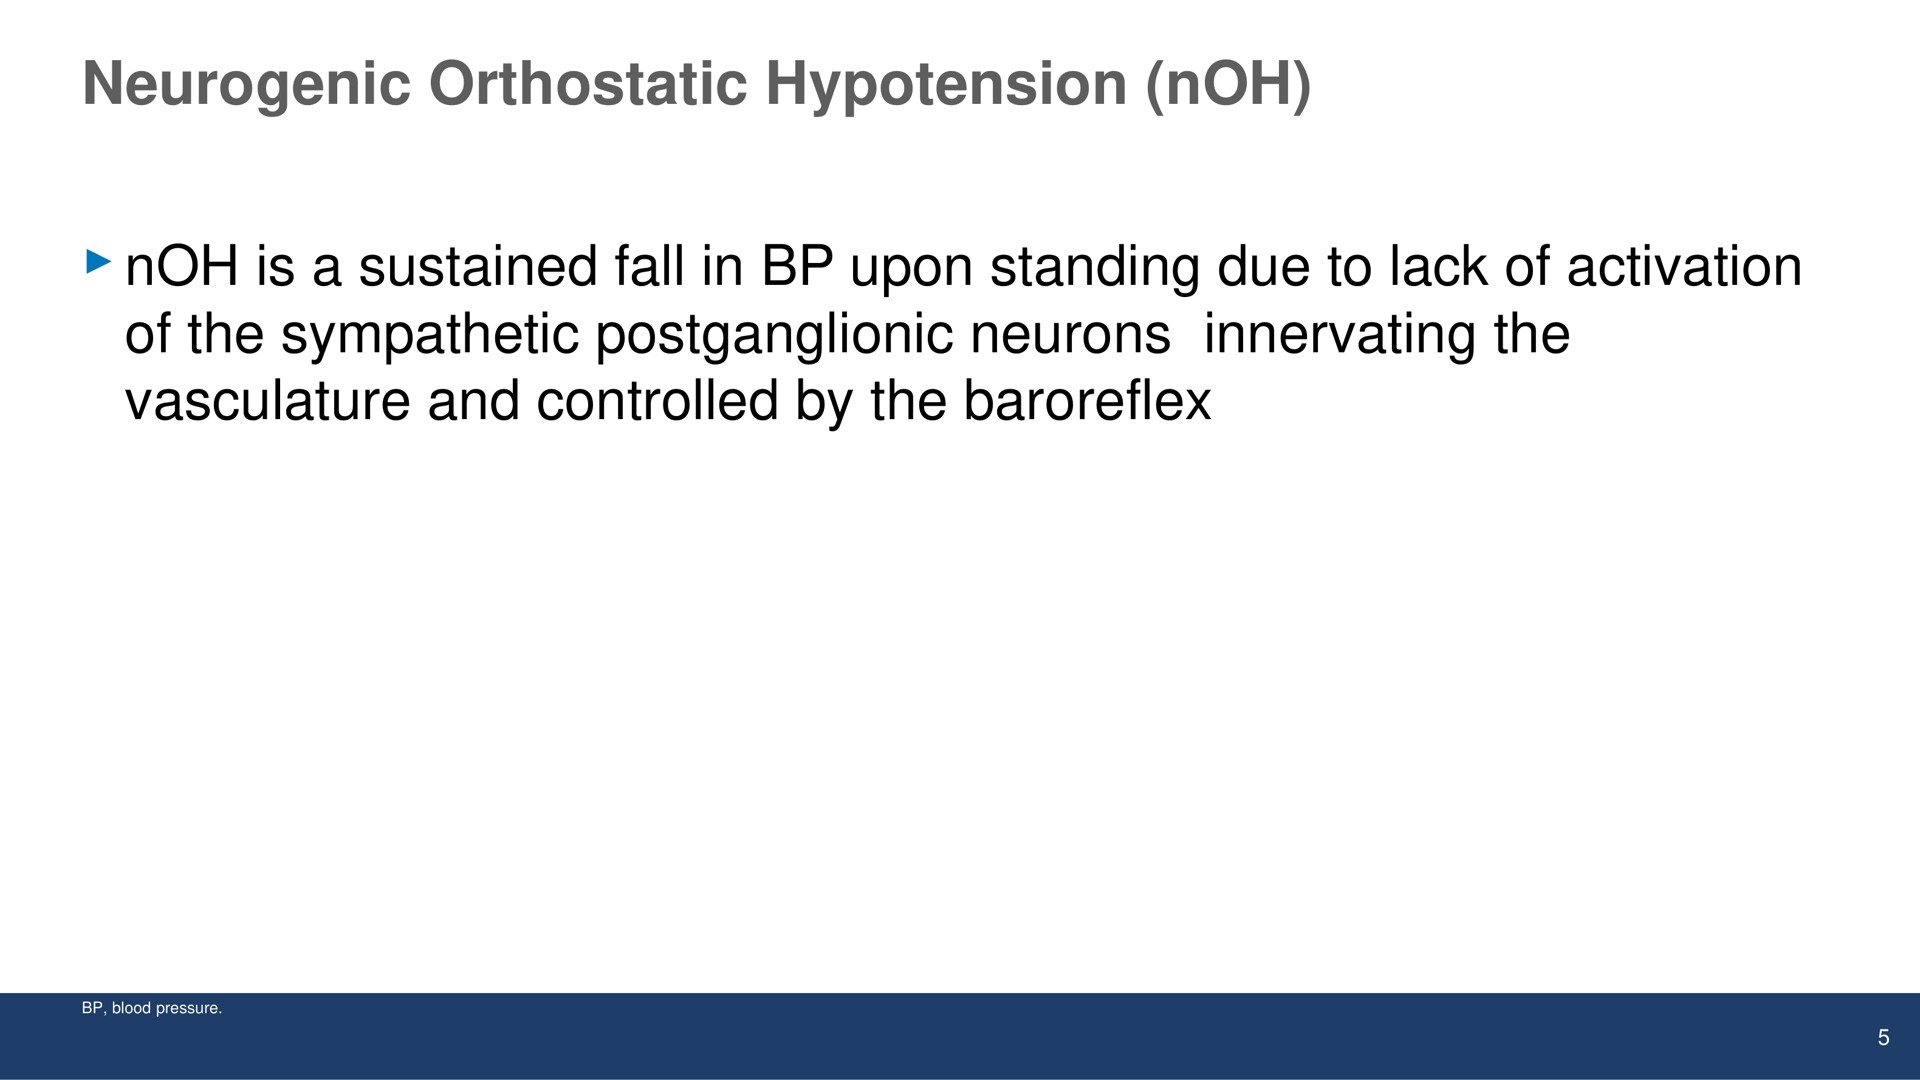 neurogenic orthostatic hypotension is a sustained fall in upon standing due to lack of activation of the sympathetic postganglionic neurons innervating the vasculature and controlled by the | Theravance Biopharma